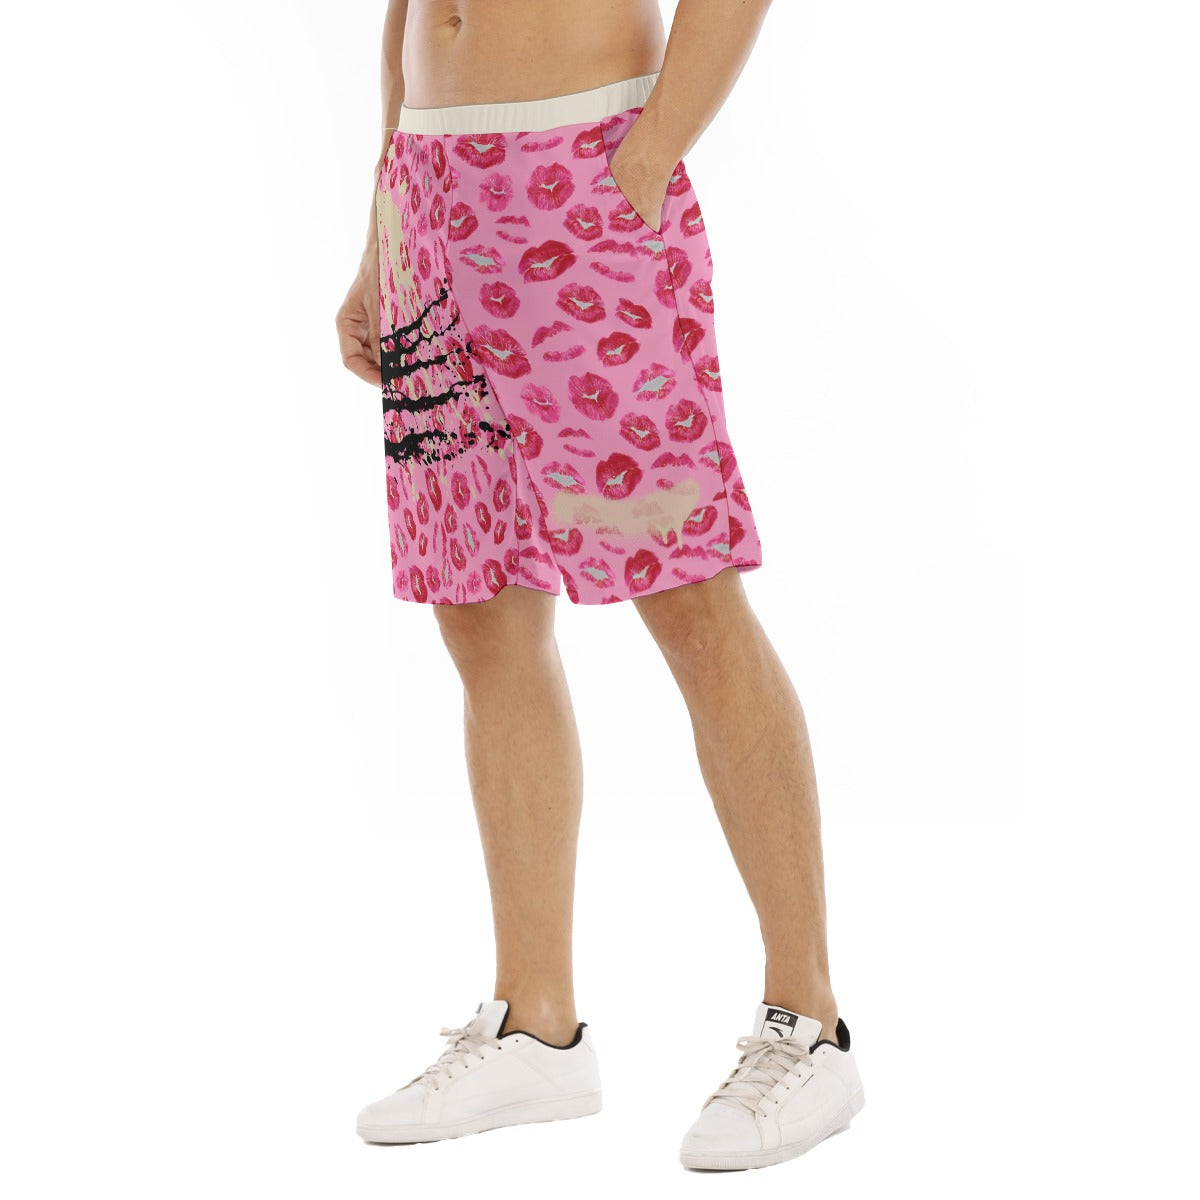 All-Over Print Men's Flat Shorts Yoycol